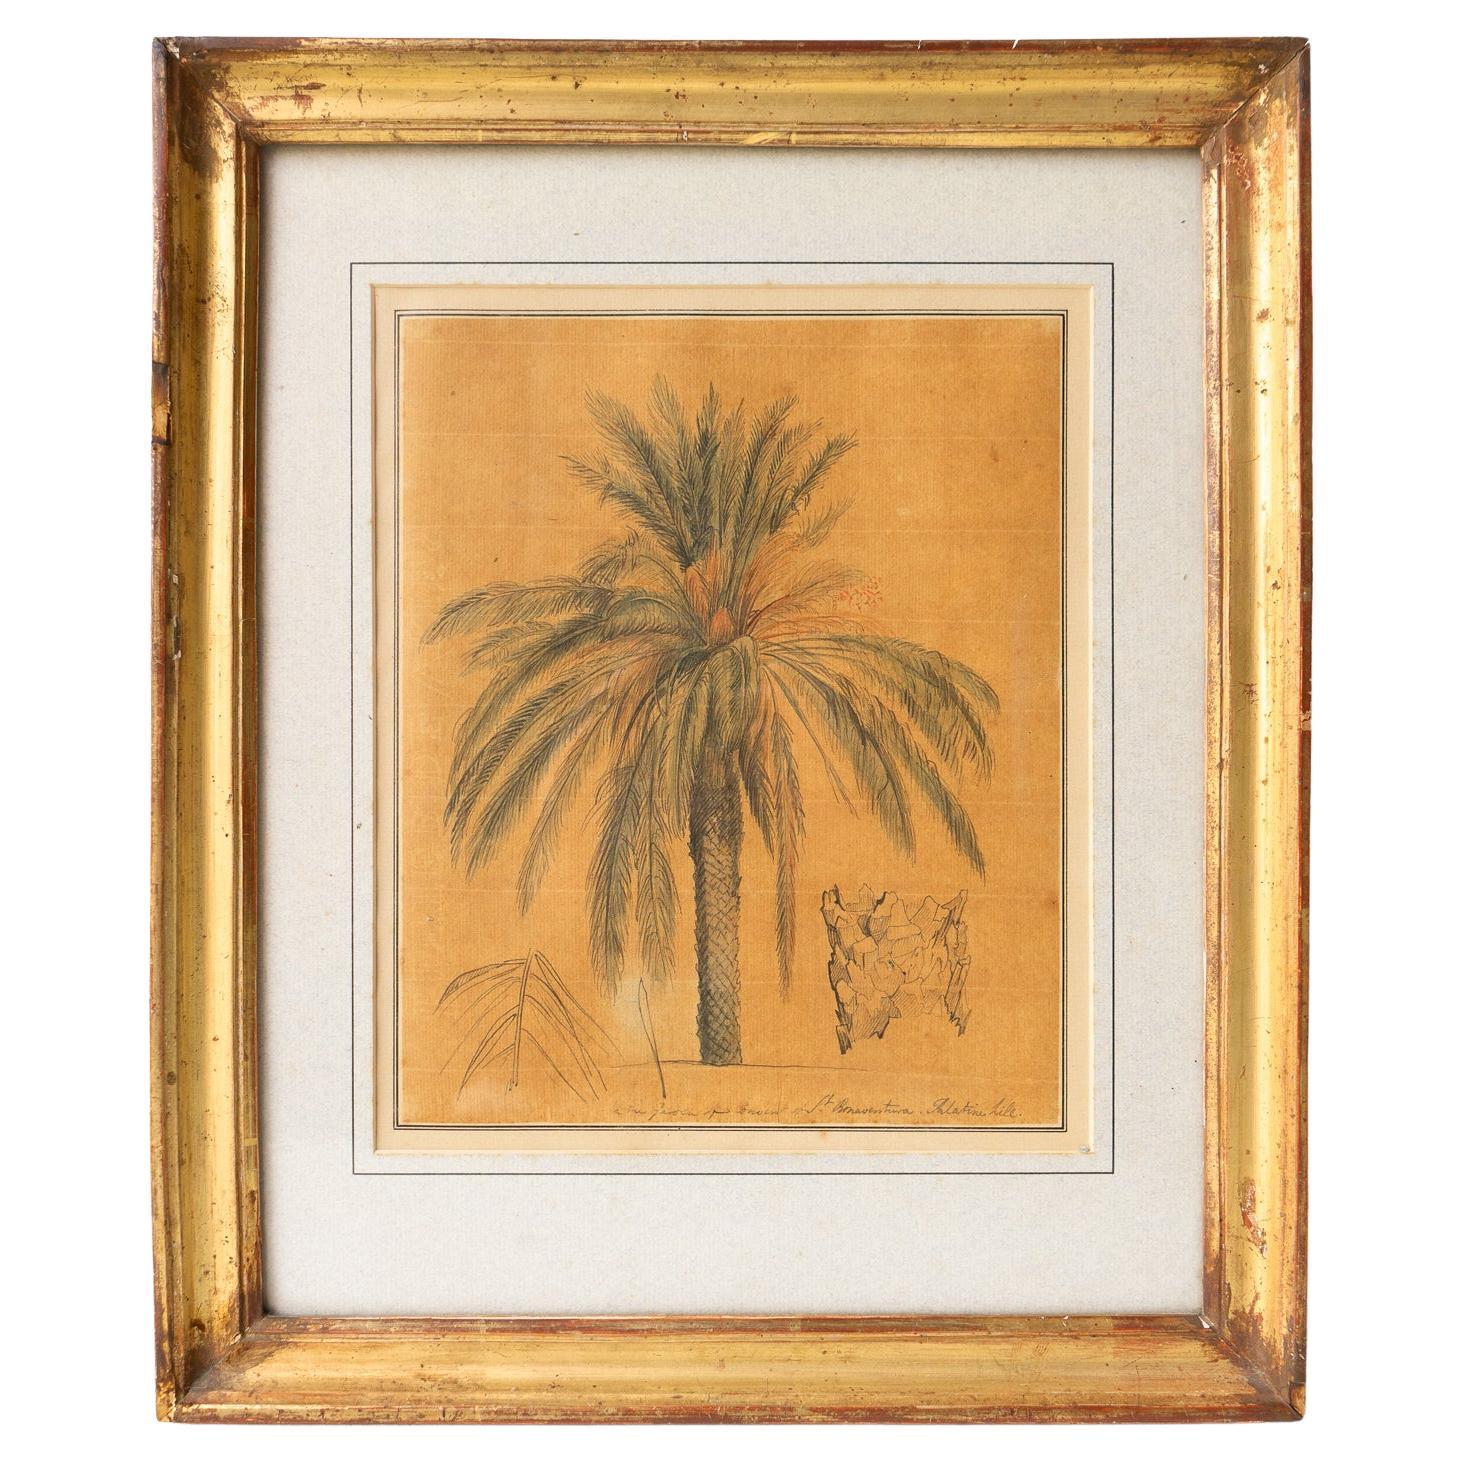 Ink and Watercolour Study of a Palm Tree by John Flaxman RA, 18th Century